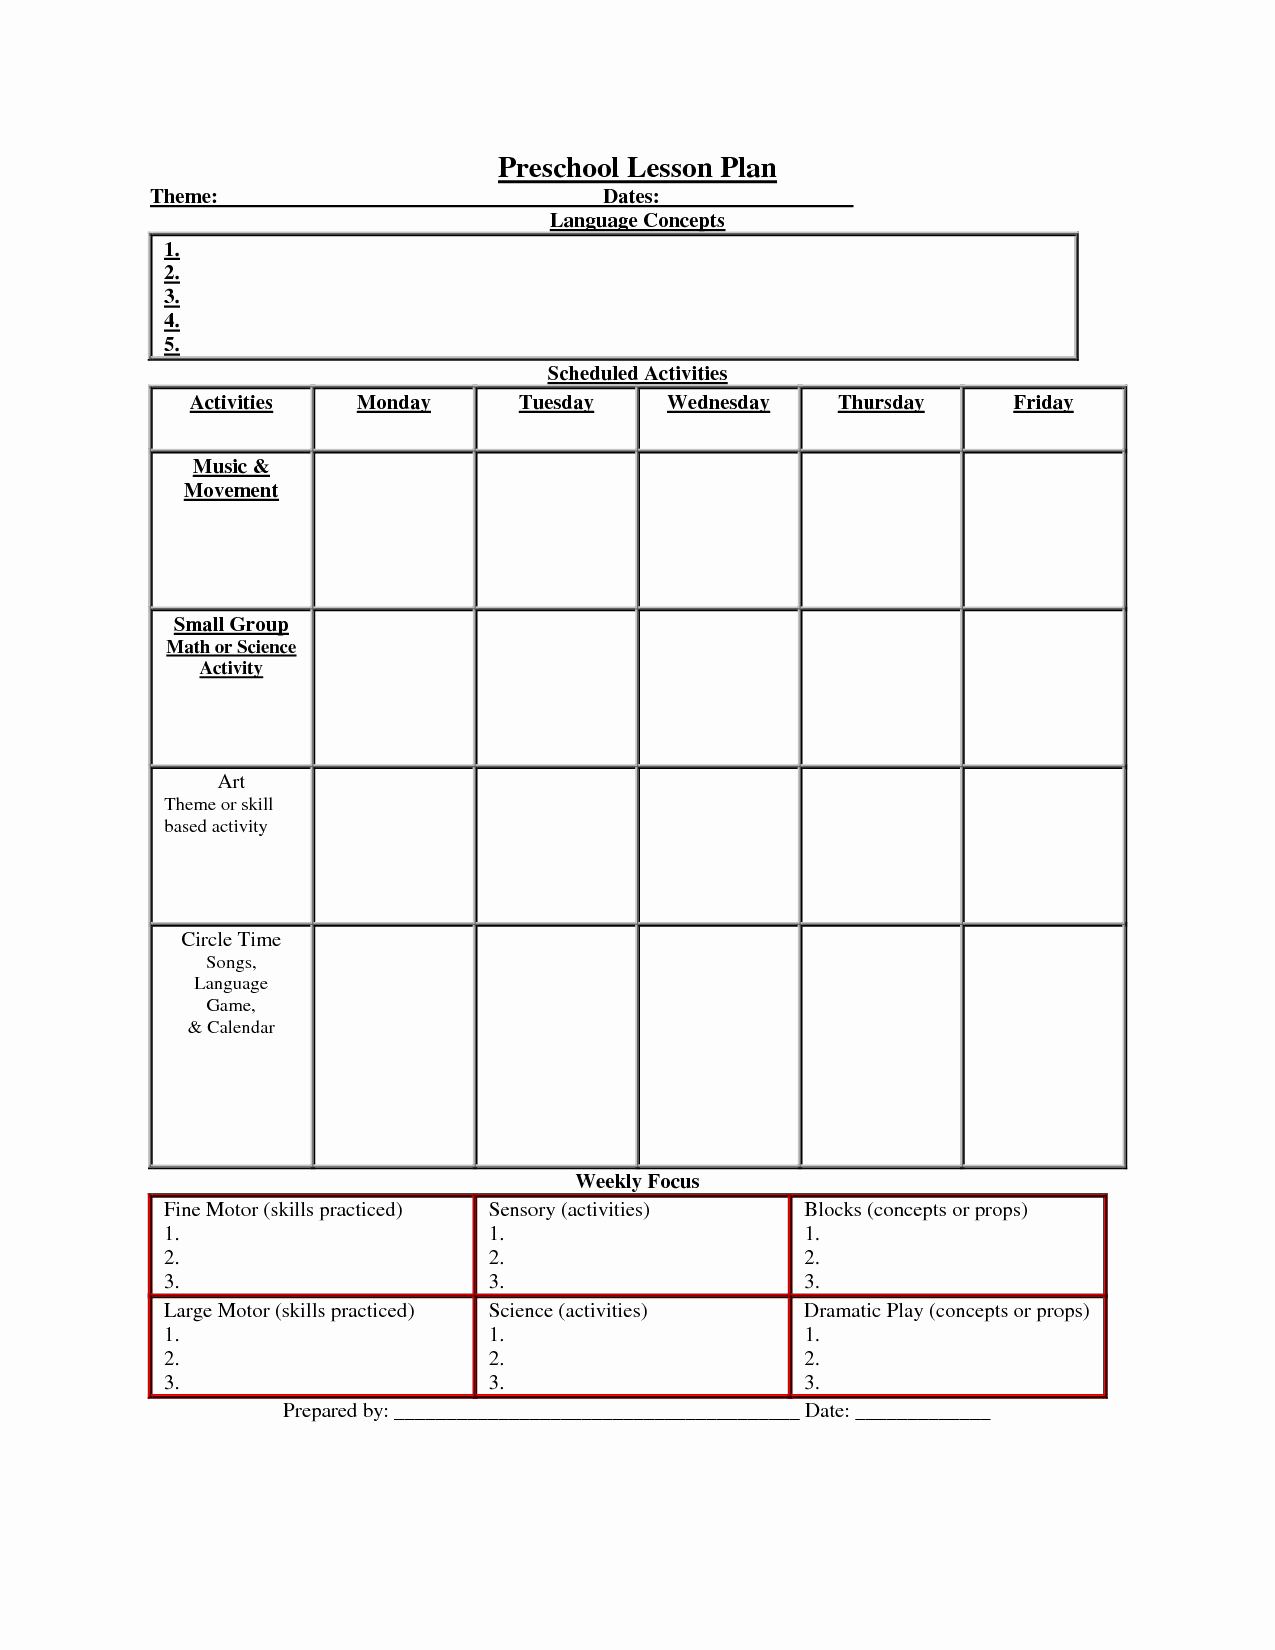 Preschool Lesson Plans Template Awesome Printable Lesson Plan Template Nuttin but Preschool